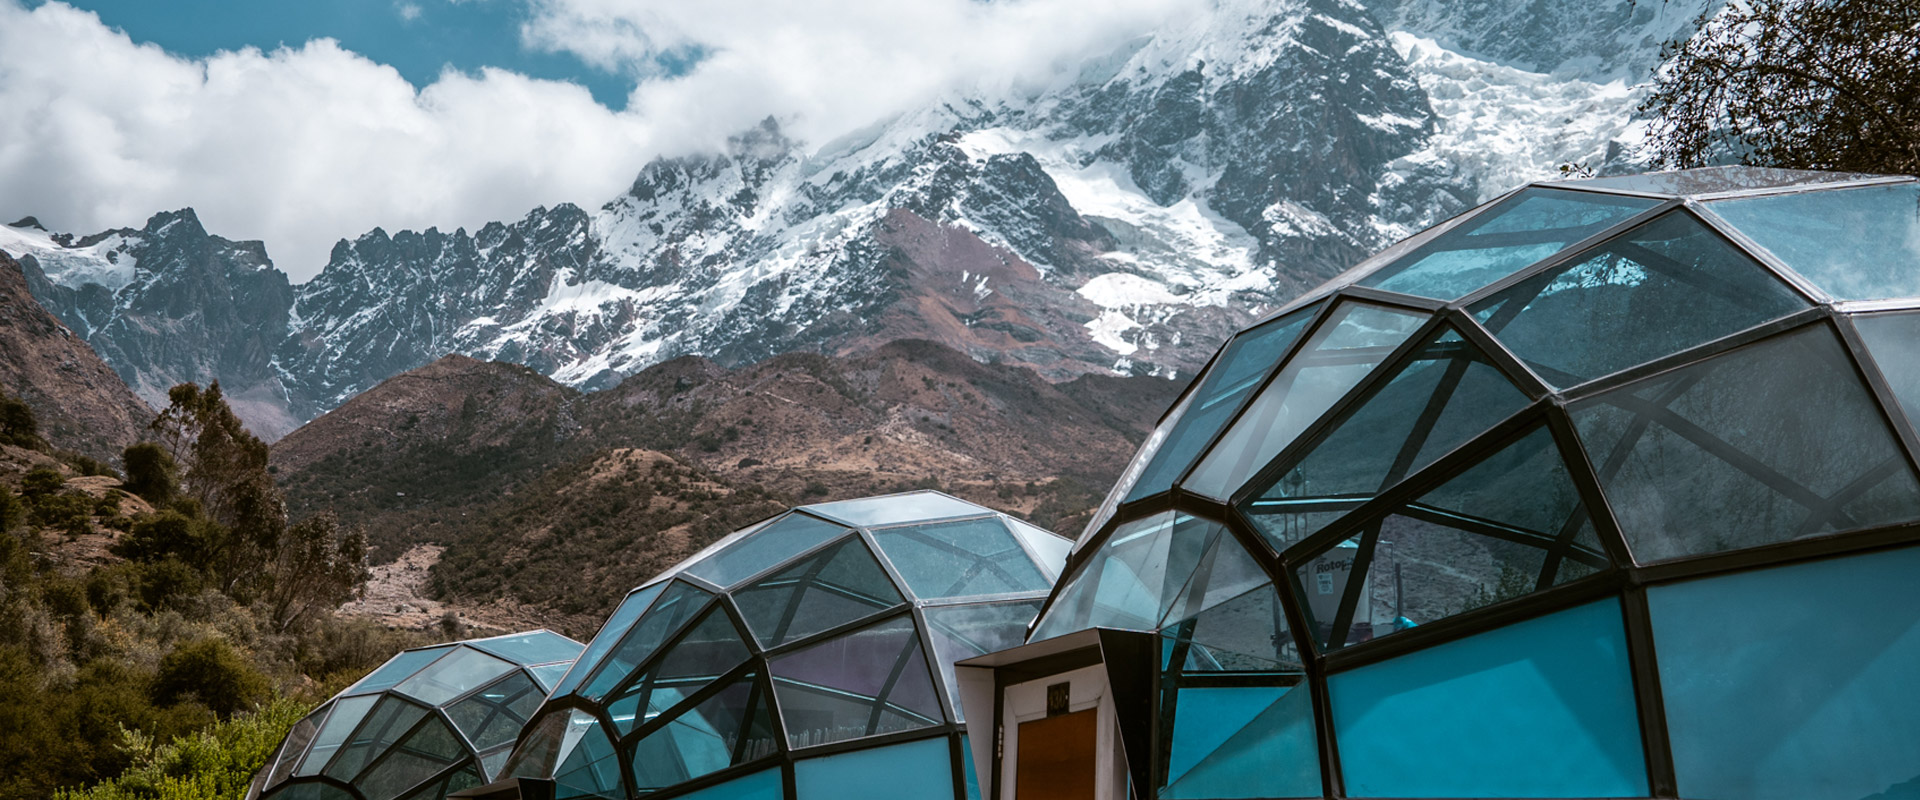 Discover Serenity: Exclusive Trekking Campsites by Salkantay